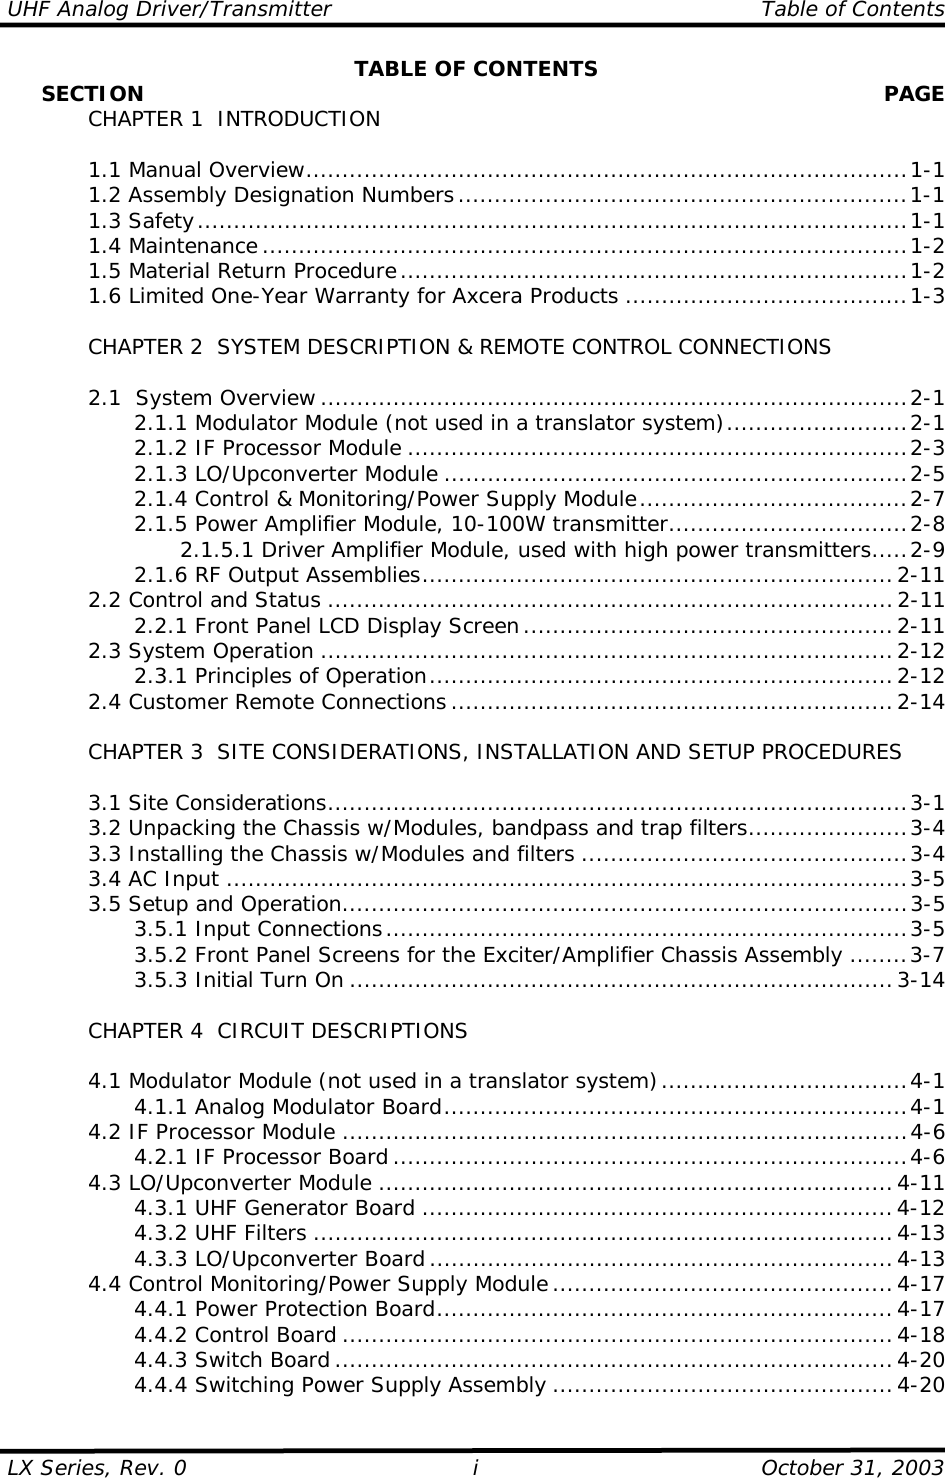 UHF Analog Driver/Transmitter    Table of Contents  LX Series, Rev. 0    October 31, 2003 i TABLE OF CONTENTS      SECTION   PAGE   CHAPTER 1  INTRODUCTION   1.1 Manual Overview...................................................................................1-1   1.2 Assembly Designation Numbers..............................................................1-1  1.3 Safety..................................................................................................1-1  1.4 Maintenance .........................................................................................1-2   1.5 Material Return Procedure......................................................................1-2   1.6 Limited One-Year Warranty for Axcera Products .......................................1-3    CHAPTER 2  SYSTEM DESCRIPTION &amp; REMOTE CONTROL CONNECTIONS    2.1  System Overview .................................................................................2-1     2.1.1 Modulator Module (not used in a translator system).........................2-1     2.1.2 IF Processor Module .....................................................................2-3     2.1.3 LO/Upconverter Module ................................................................2-5     2.1.4 Control &amp; Monitoring/Power Supply Module.....................................2-7     2.1.5 Power Amplifier Module, 10-100W transmitter.................................2-8       2.1.5.1 Driver Amplifier Module, used with high power transmitters.....2-9     2.1.6 RF Output Assemblies.................................................................2-11   2.2 Control and Status ..............................................................................2-11     2.2.1 Front Panel LCD Display Screen...................................................2-11  2.3 System Operation ...............................................................................2-12     2.3.1 Principles of Operation................................................................2-12  2.4 Customer Remote Connections .............................................................2-14      CHAPTER 3  SITE CONSIDERATIONS, INSTALLATION AND SETUP PROCEDURES     3.1 Site Considerations................................................................................3-1   3.2 Unpacking the Chassis w/Modules, bandpass and trap filters......................3-4   3.3 Installing the Chassis w/Modules and filters .............................................3-4  3.4 AC Input ..............................................................................................3-5   3.5 Setup and Operation..............................................................................3-5     3.5.1 Input Connections........................................................................3-5     3.5.2 Front Panel Screens for the Exciter/Amplifier Chassis Assembly ........3-7     3.5.3 Initial Turn On ...........................................................................3-14    CHAPTER 4  CIRCUIT DESCRIPTIONS    4.1 Modulator Module (not used in a translator system)..................................4-1     4.1.1 Analog Modulator Board................................................................4-1   4.2 IF Processor Module ..............................................................................4-6     4.2.1 IF Processor Board .......................................................................4-6   4.3 LO/Upconverter Module .......................................................................4-11     4.3.1 UHF Generator Board .................................................................4-12     4.3.2 UHF Filters ................................................................................4-13     4.3.3 LO/Upconverter Board ................................................................4-13   4.4 Control Monitoring/Power Supply Module...............................................4-17     4.4.1 Power Protection Board...............................................................4-17     4.4.2 Control Board ............................................................................4-18   4.4.3 Switch Board .............................................................................4-20     4.4.4 Switching Power Supply Assembly ...............................................4-20 